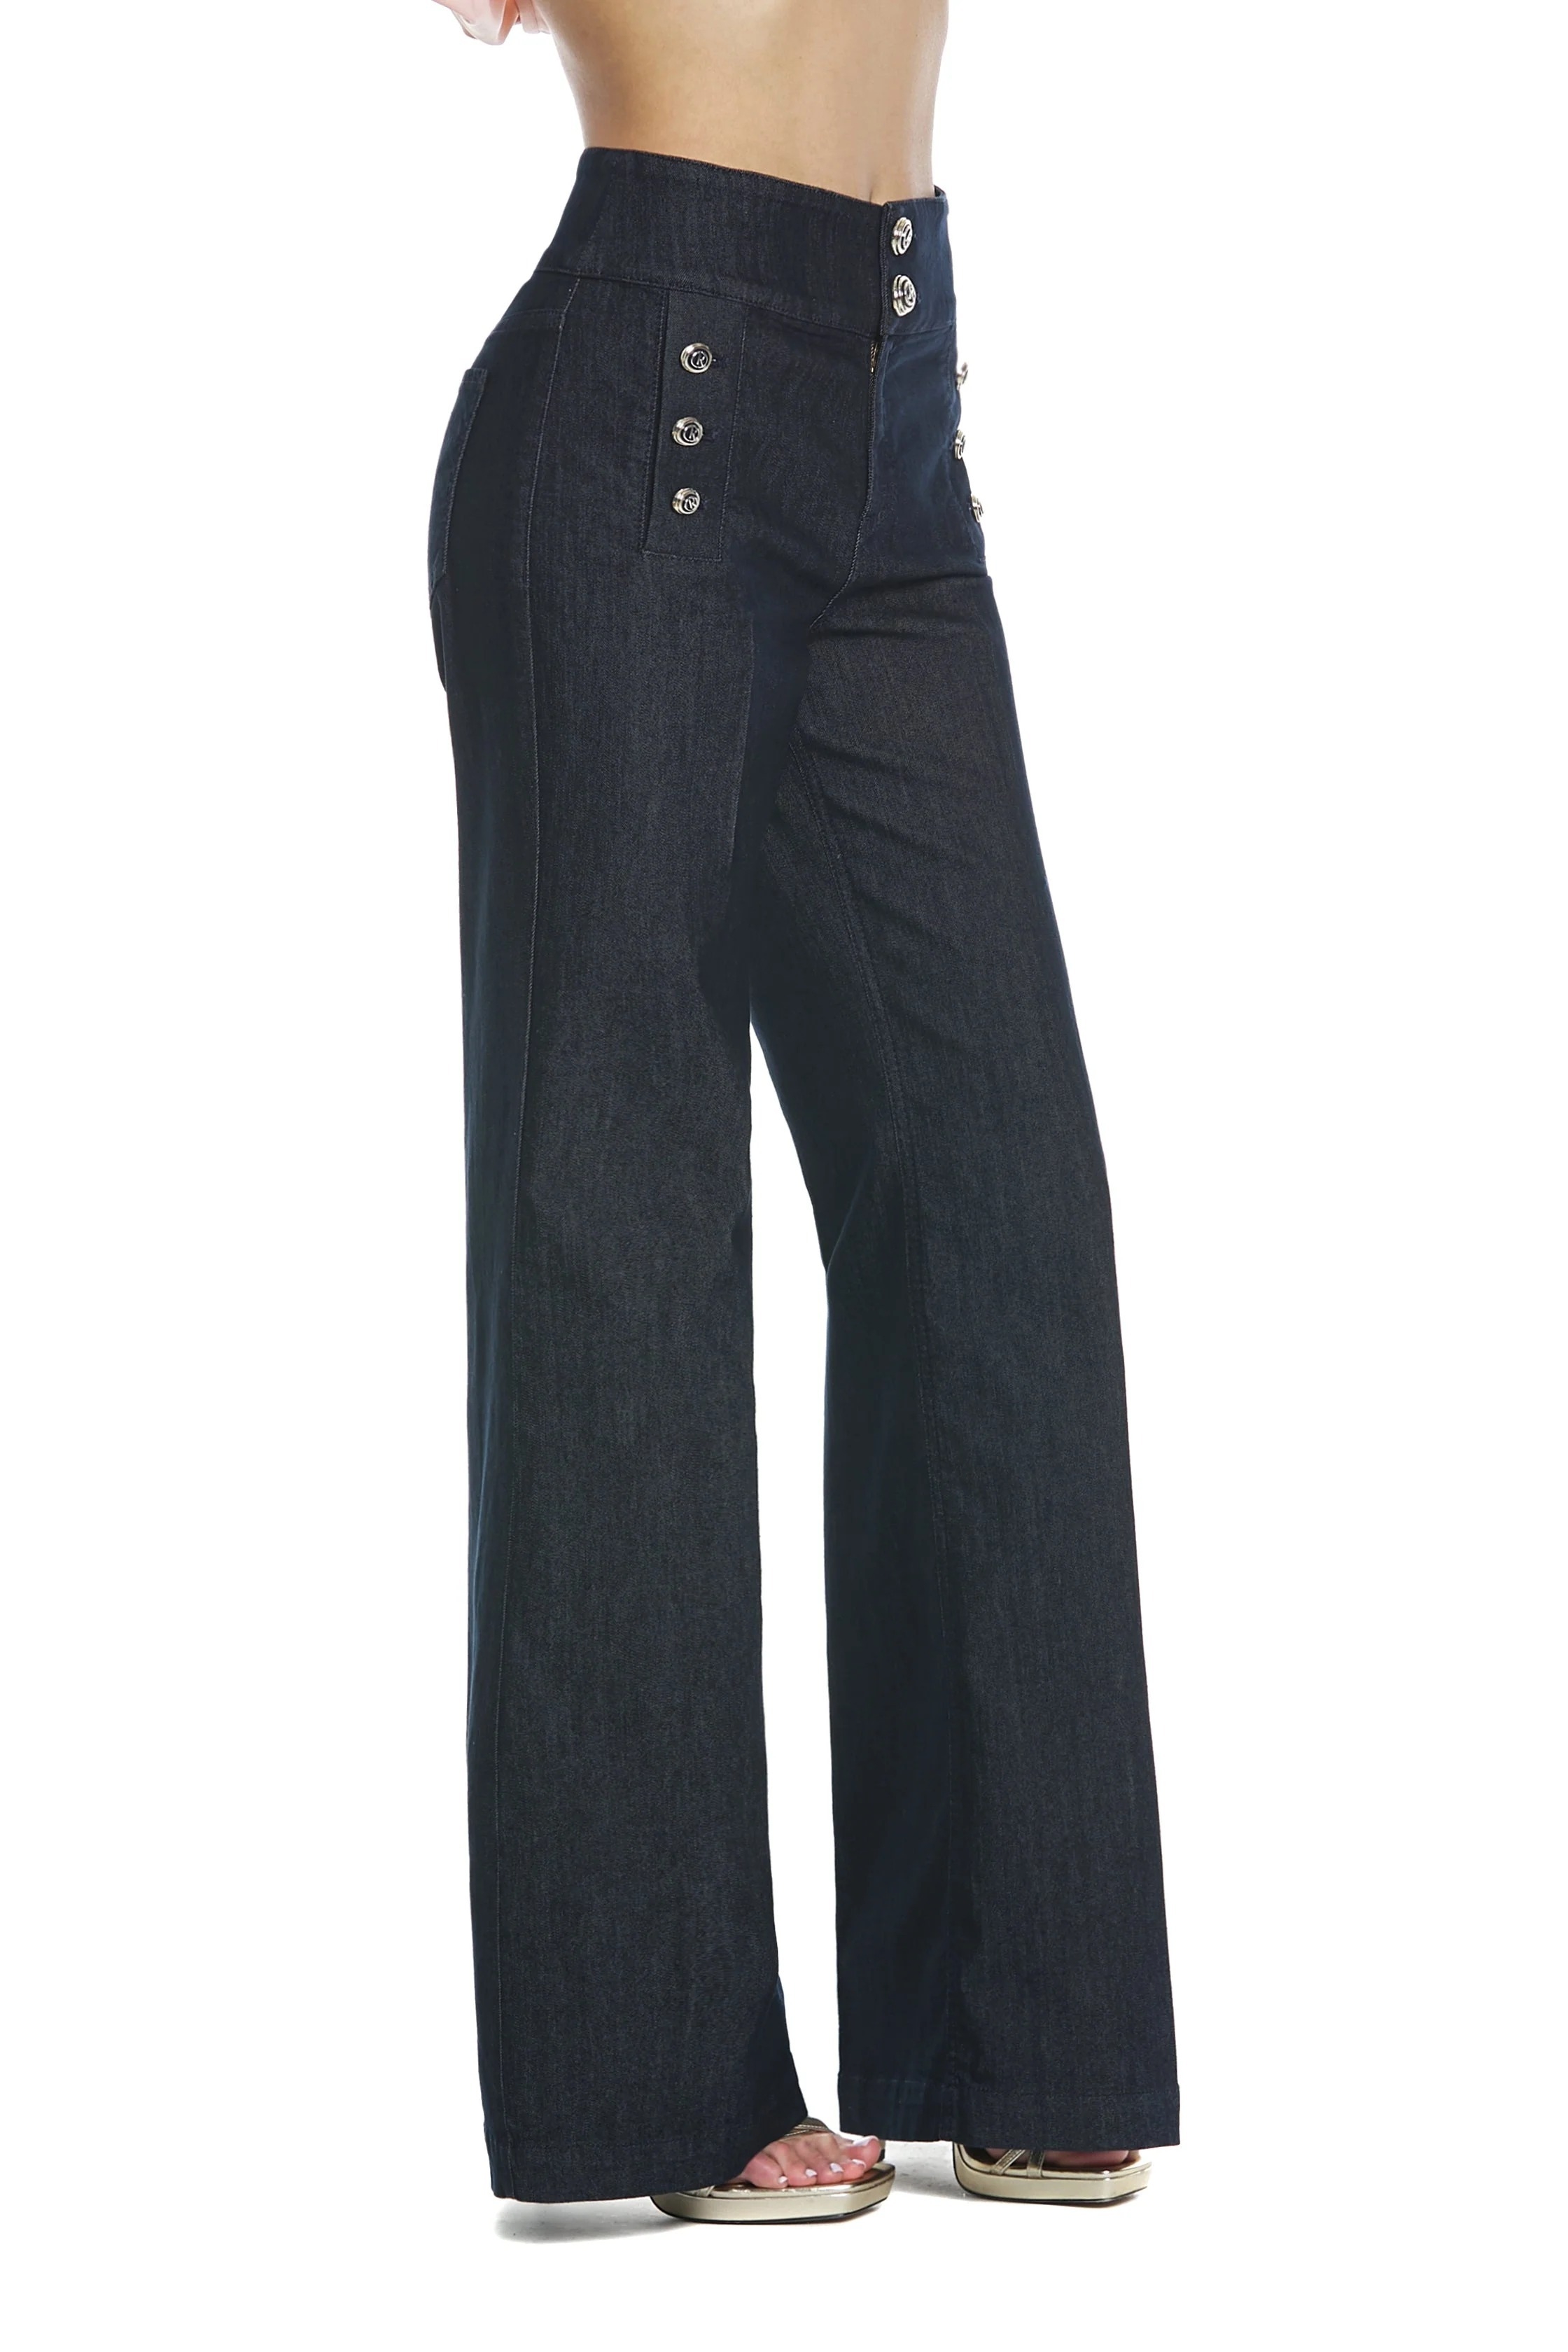 Denim Pants With Golden Buttons RELISH